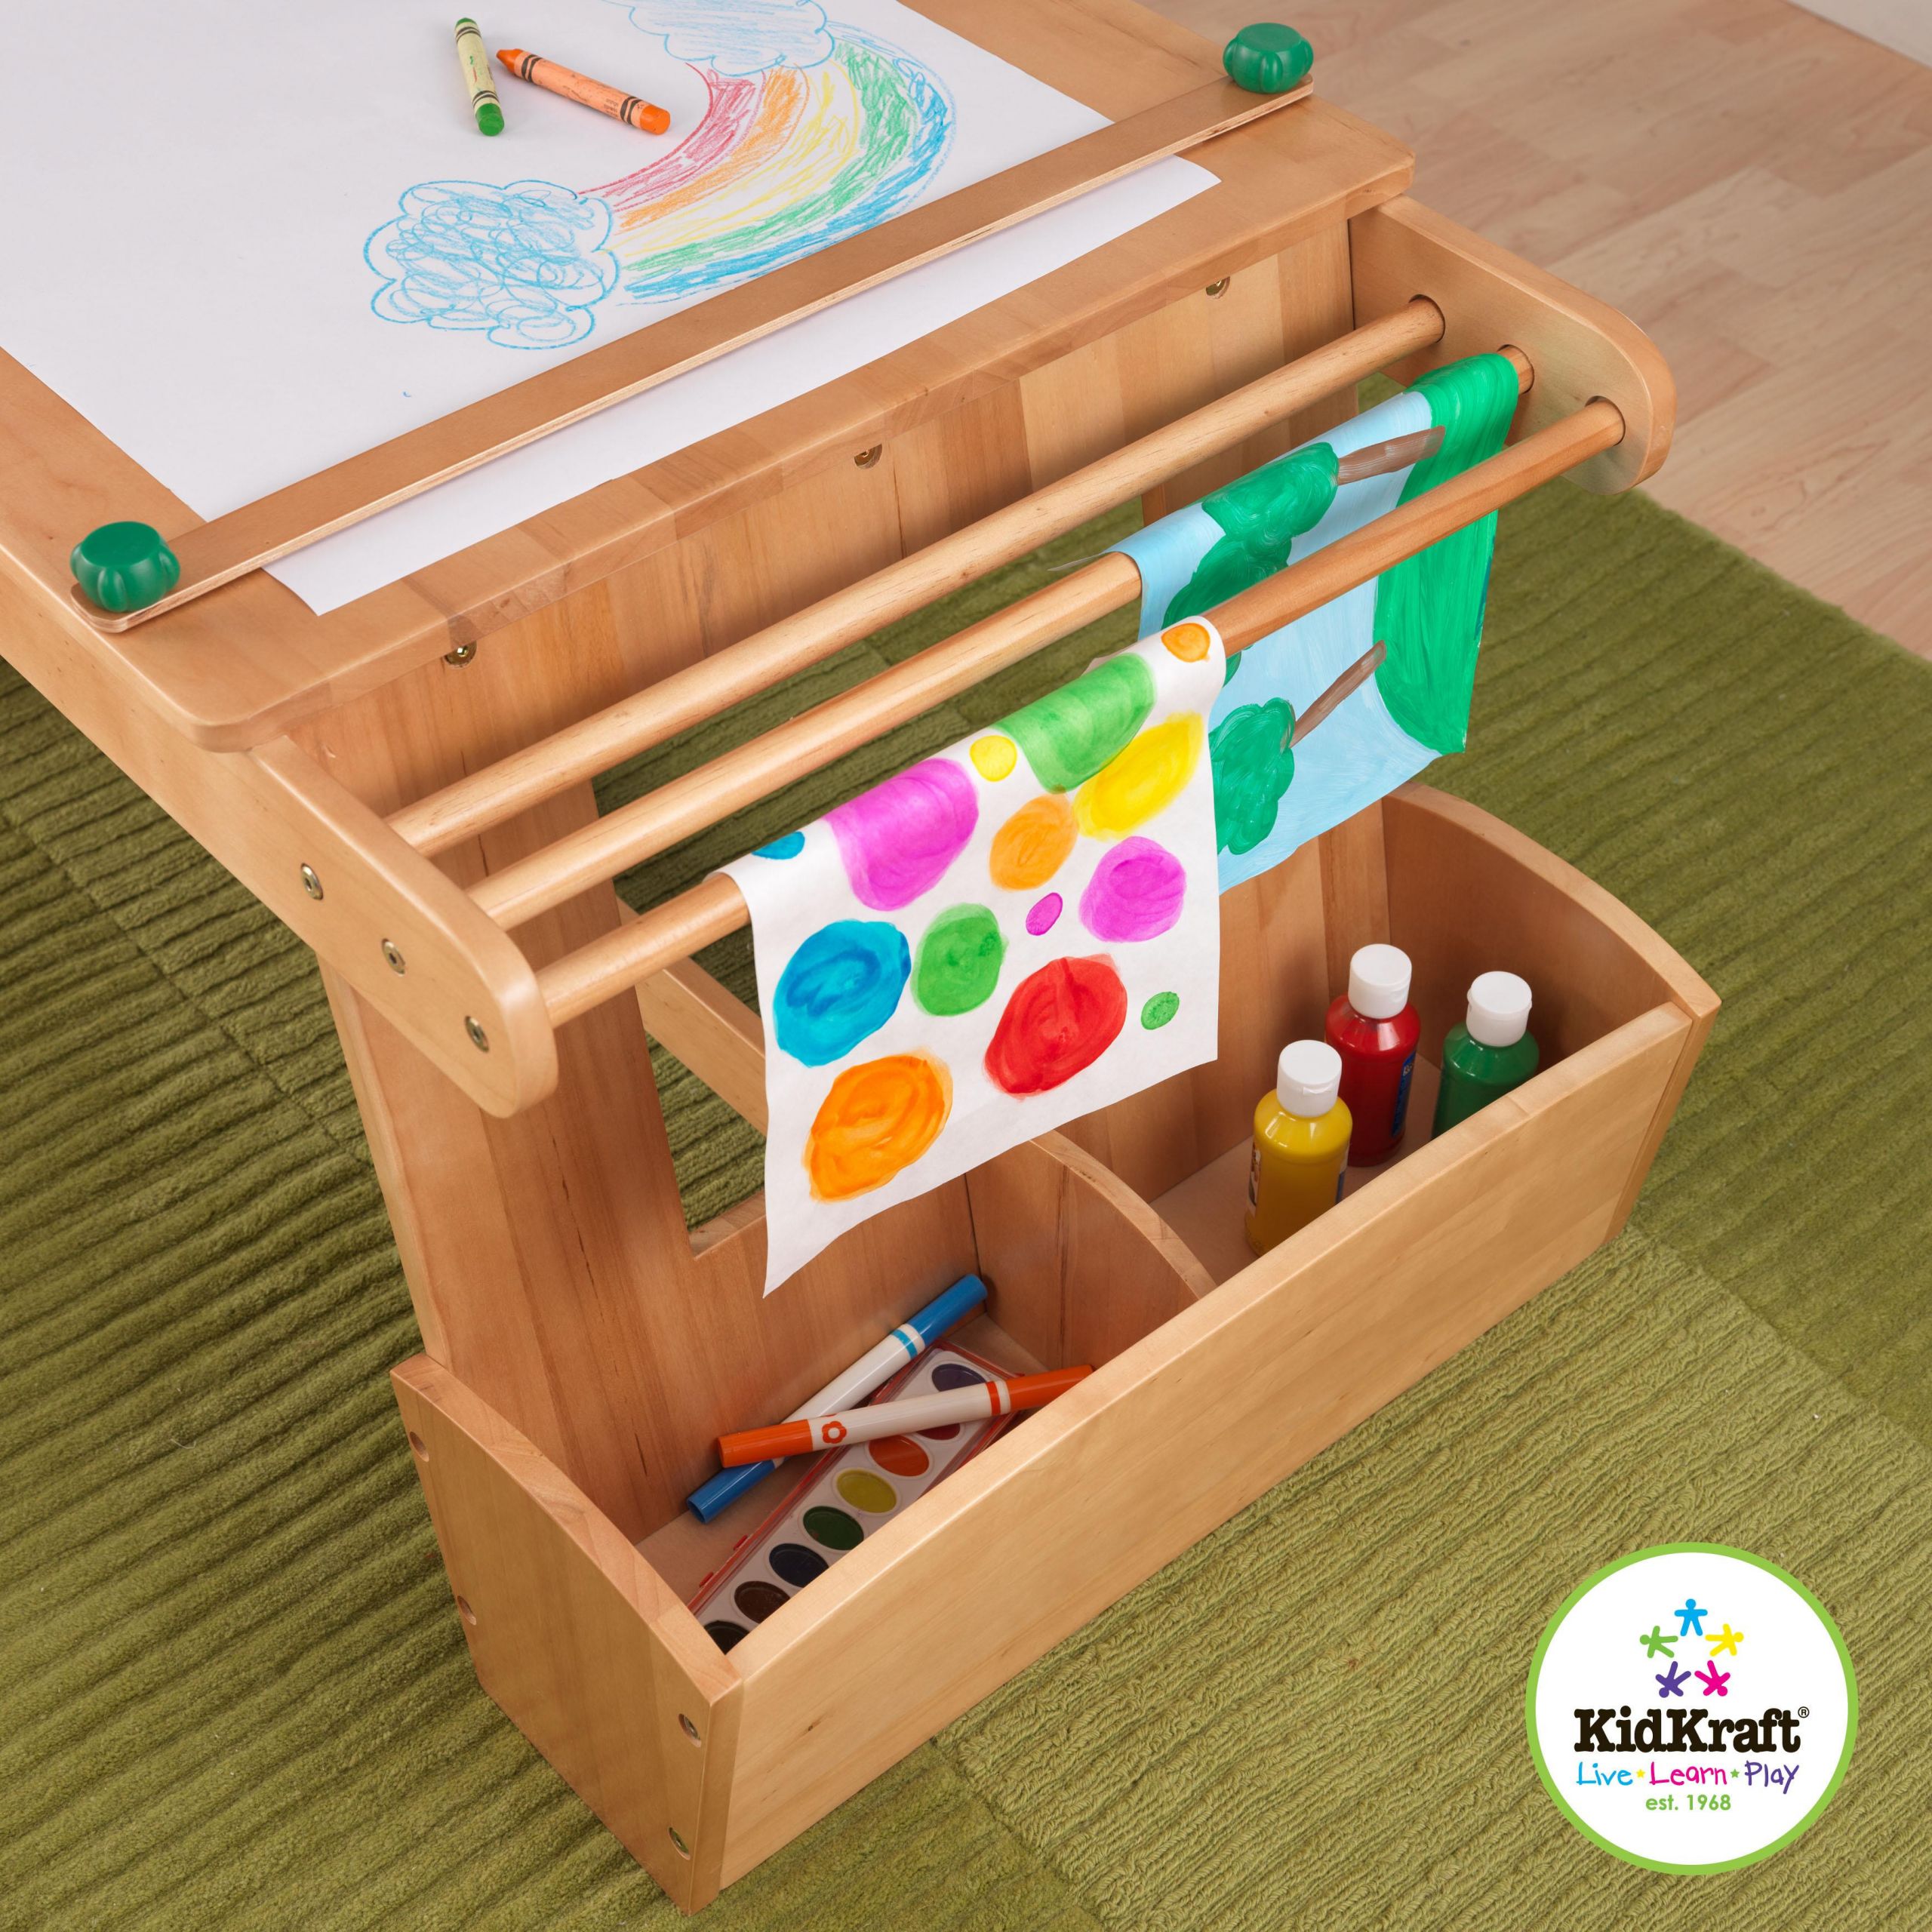 Kids Art Desk With Storage
 KidKraft Art Table With Drying Rack And Storage by OJ